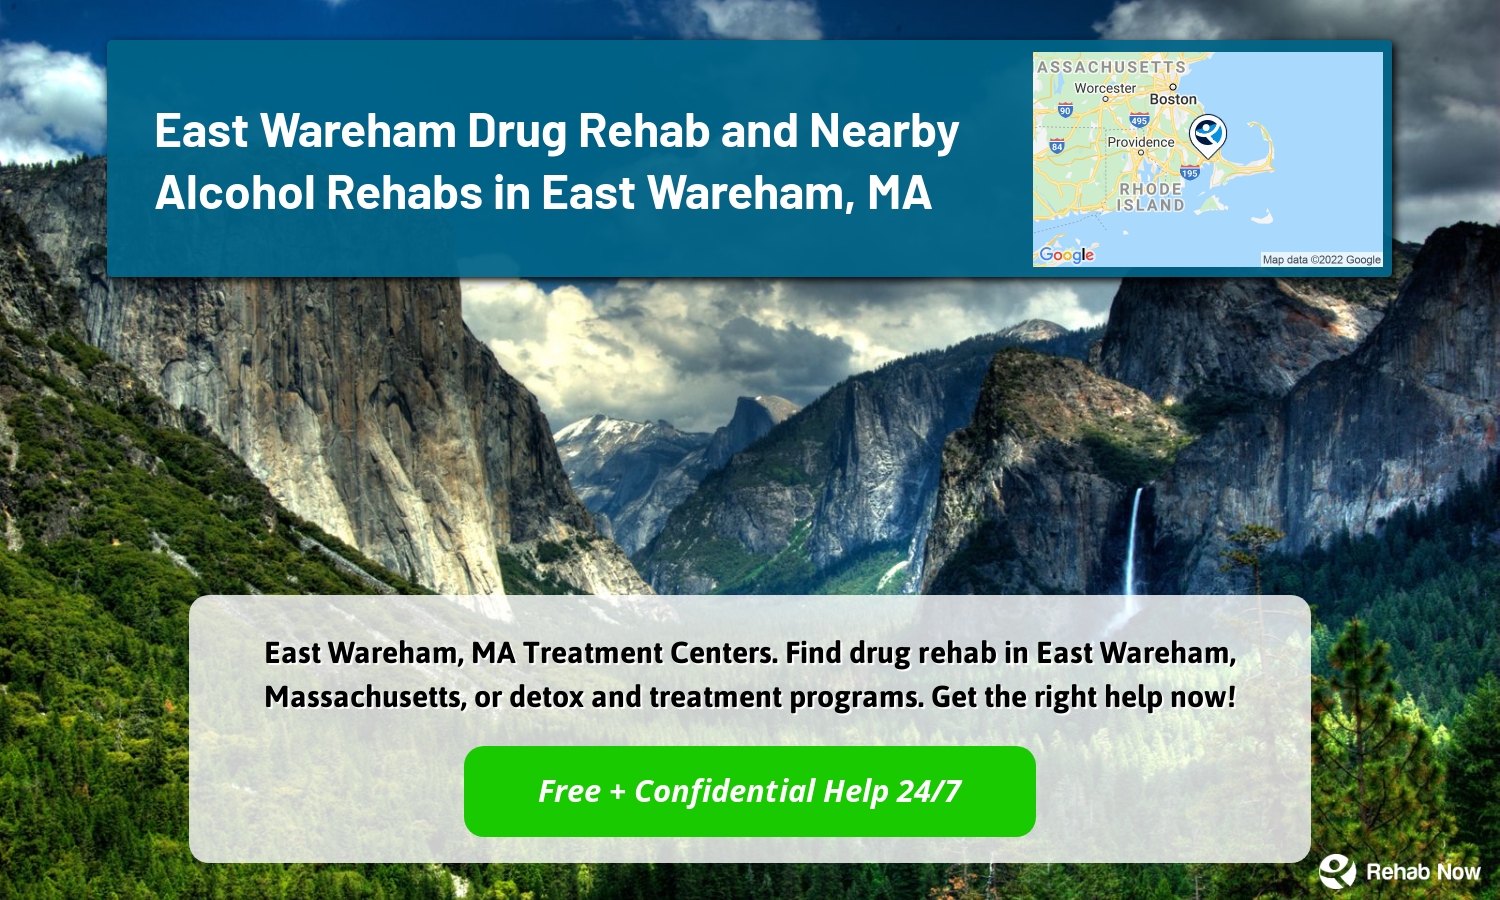 East Wareham, MA Treatment Centers. Find drug rehab in East Wareham, Massachusetts, or detox and treatment programs. Get the right help now!